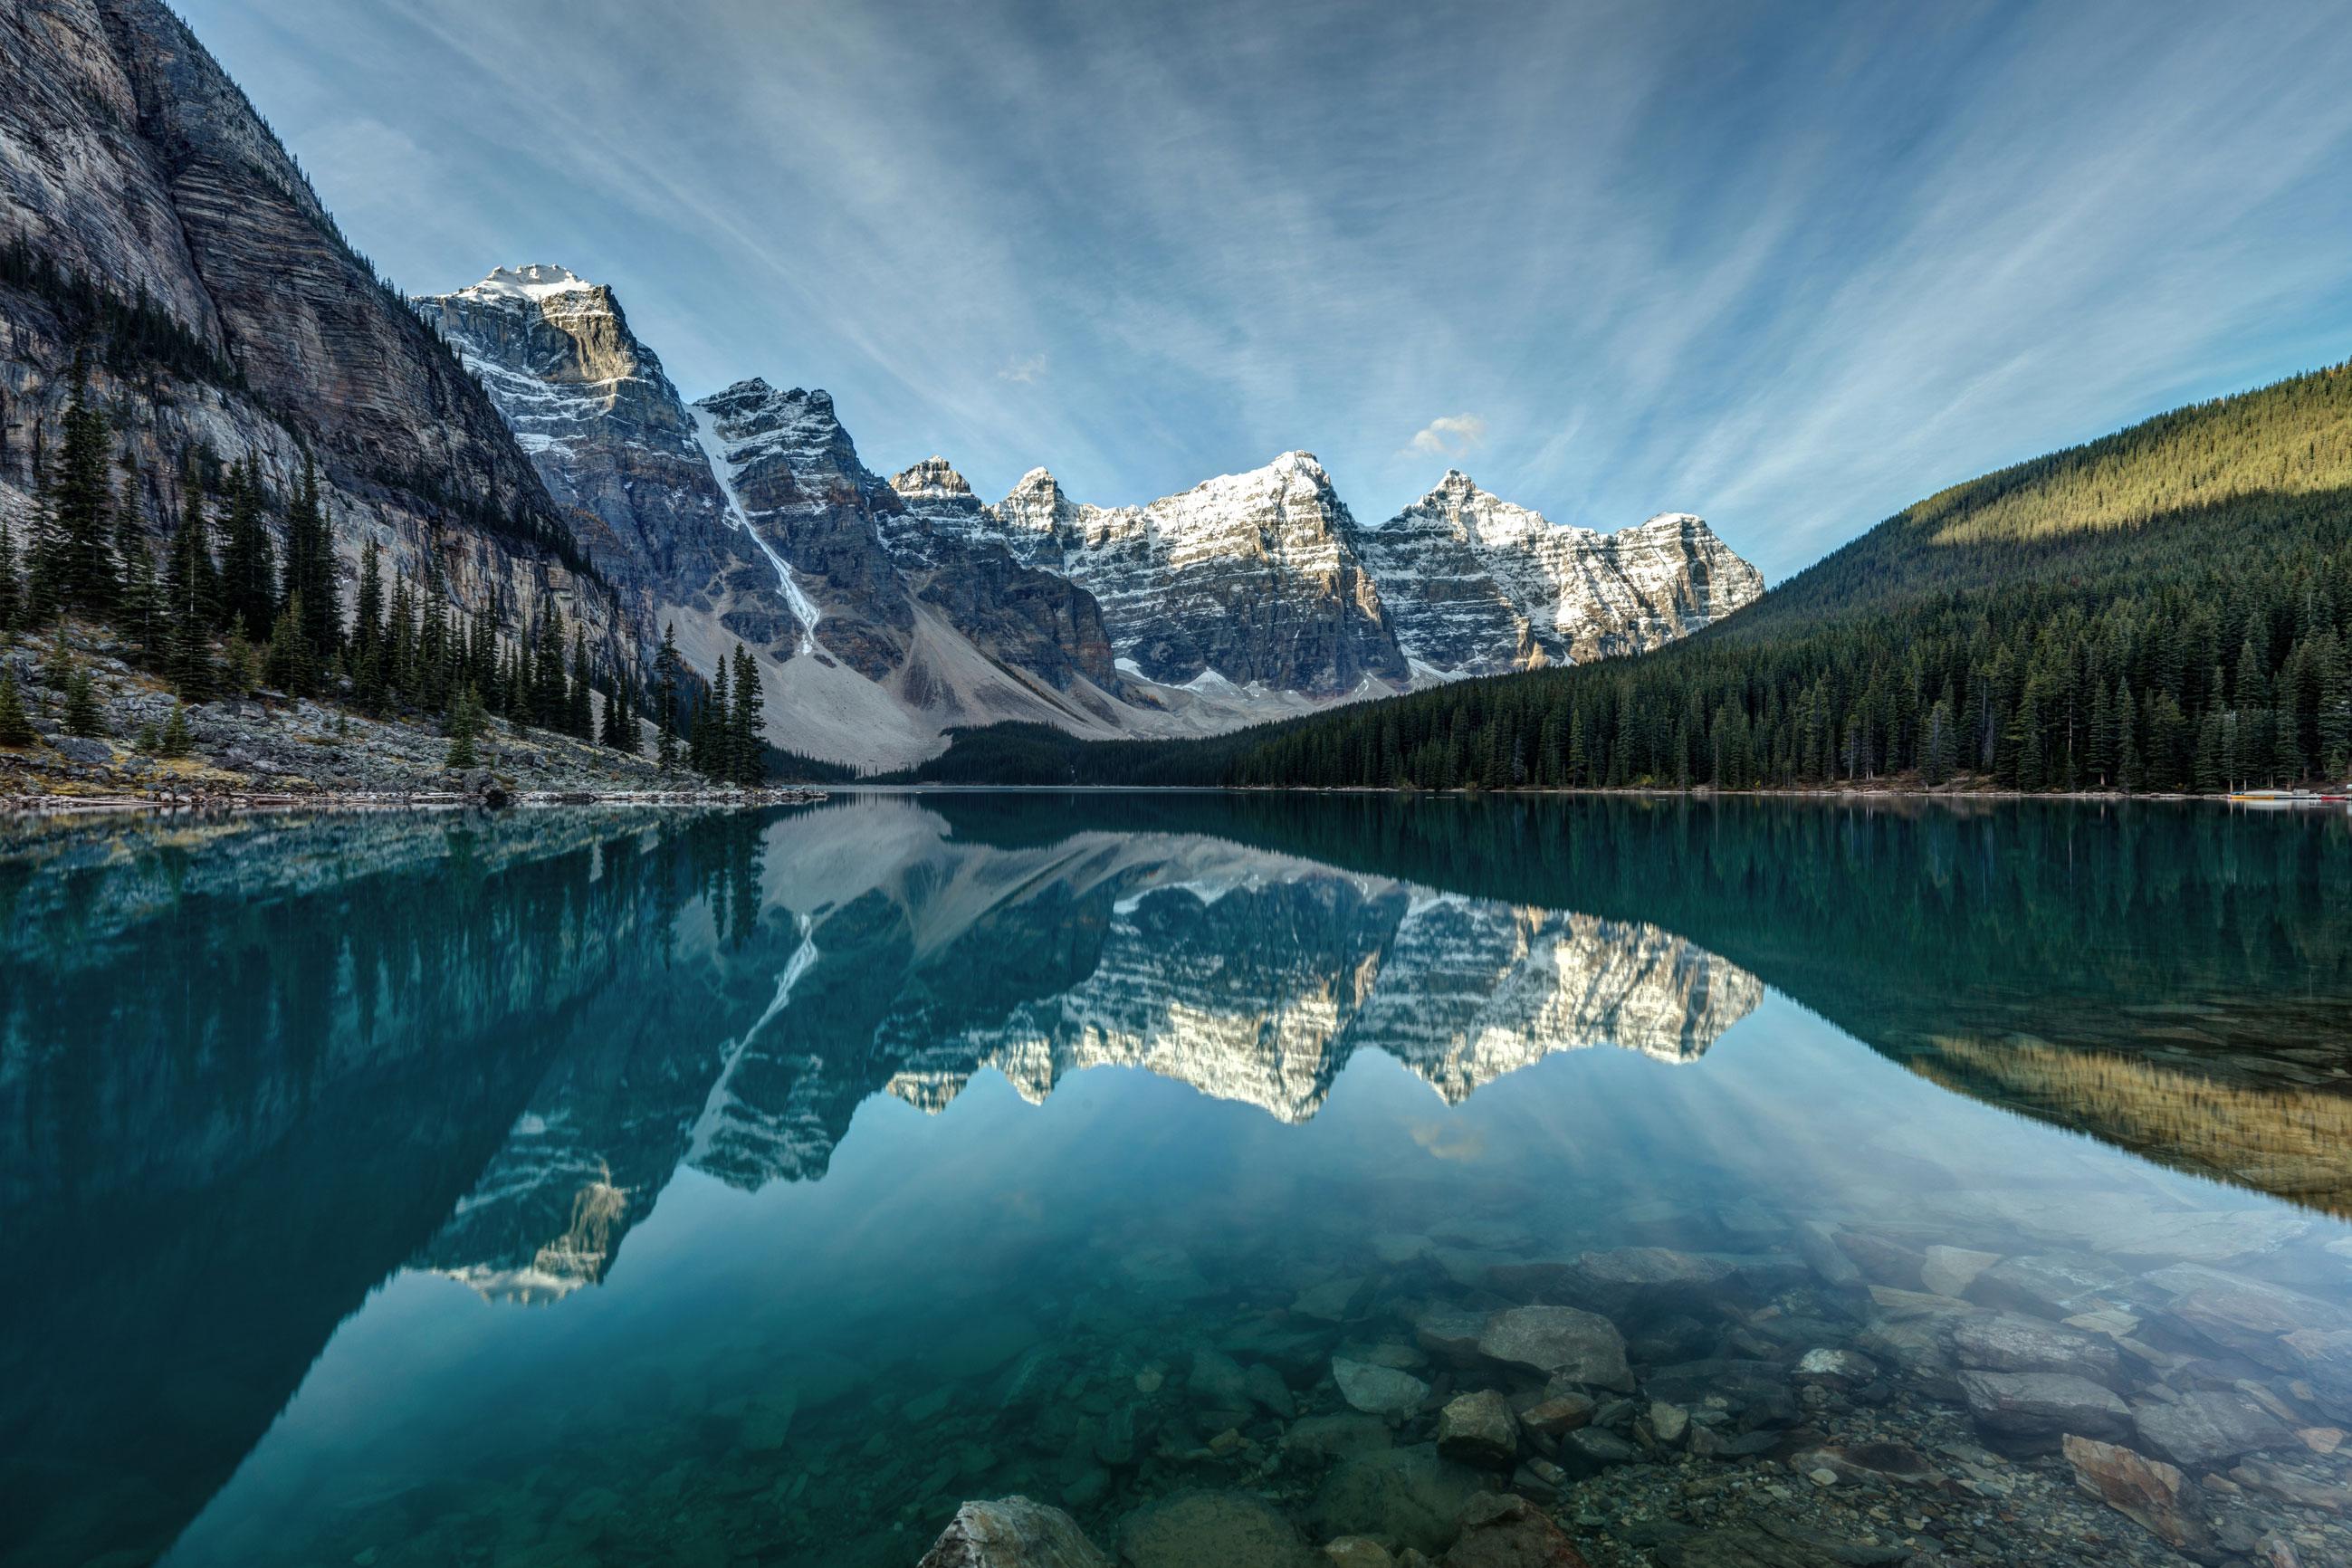 Explore the Rockies from Canada to the USA with North America vacation packages